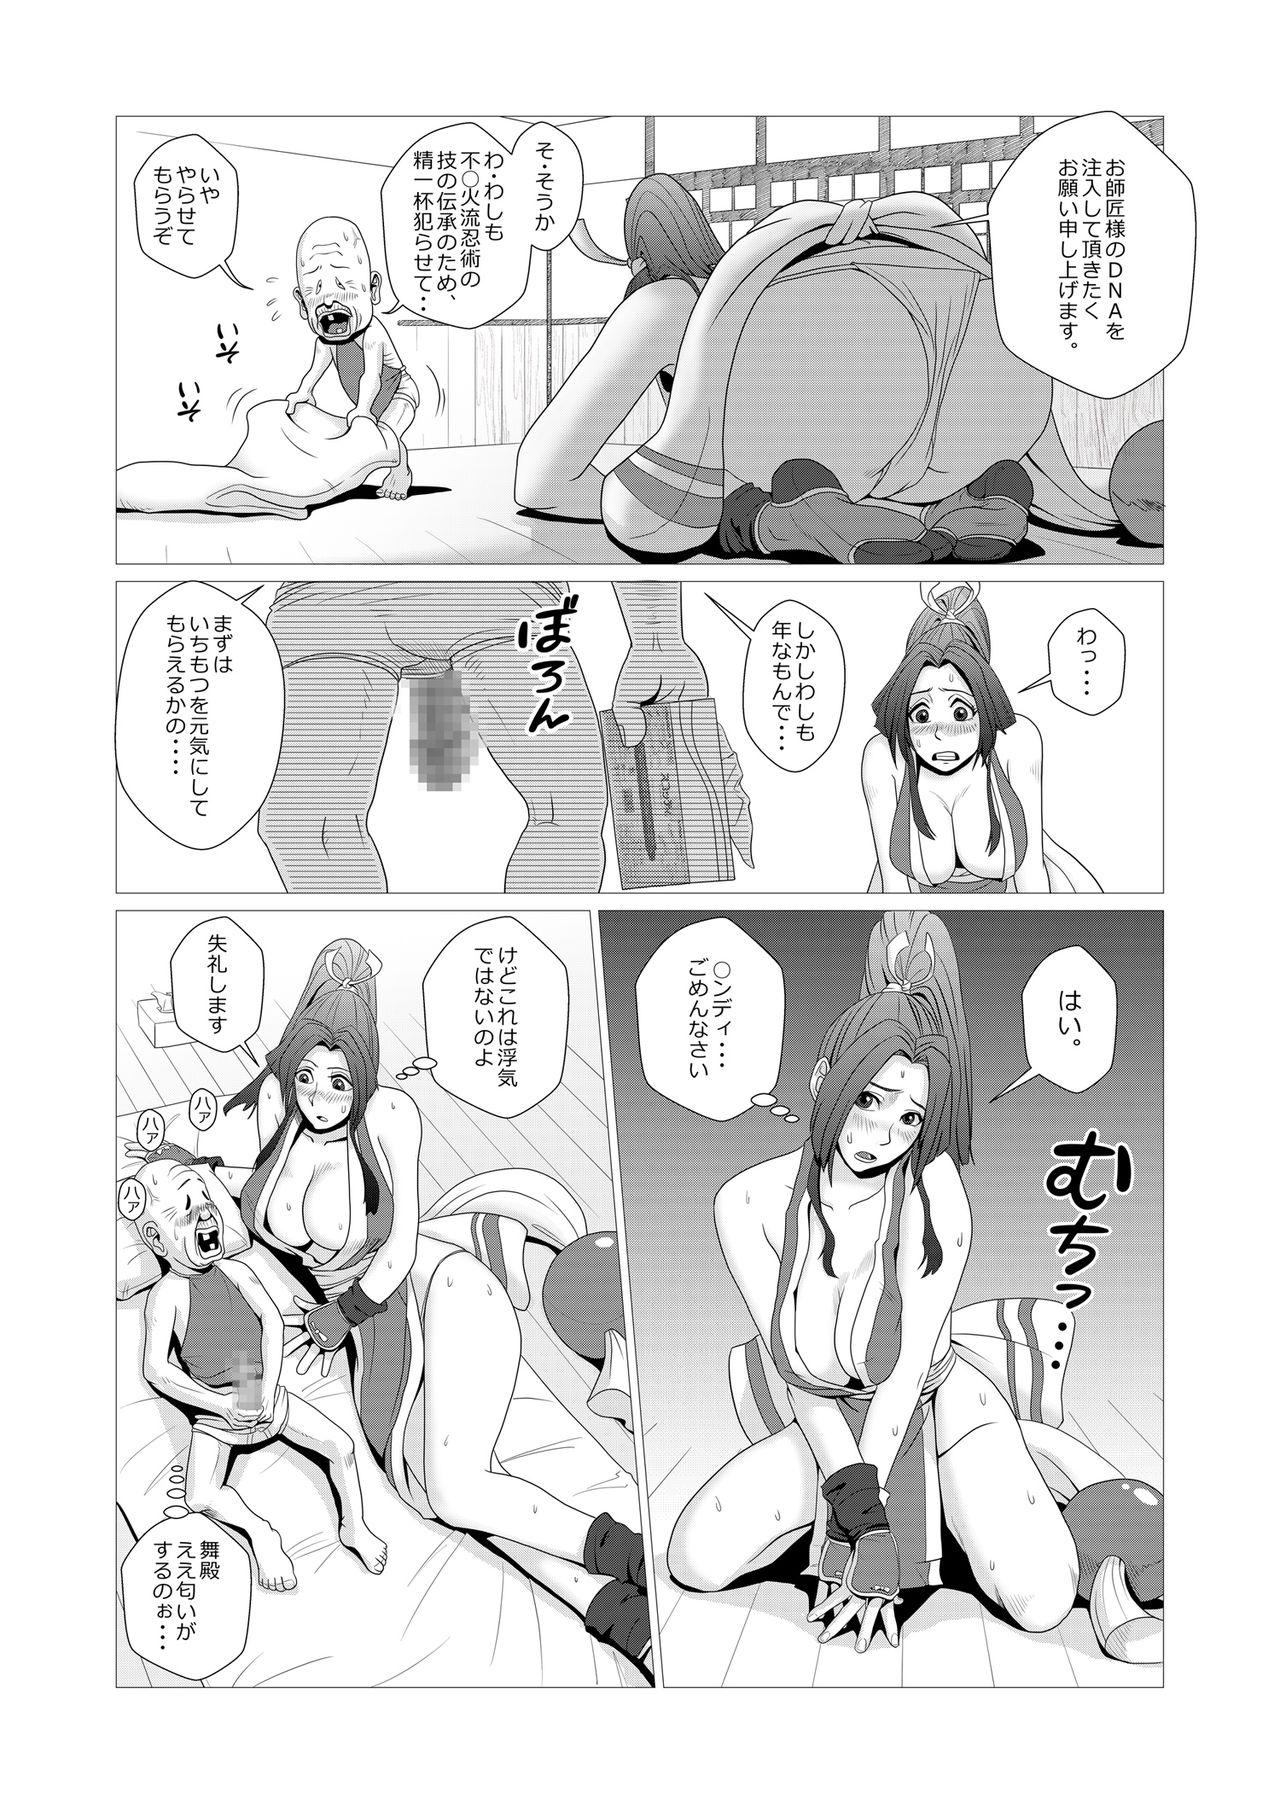 Online Maidono - King of fighters Spa - Page 4